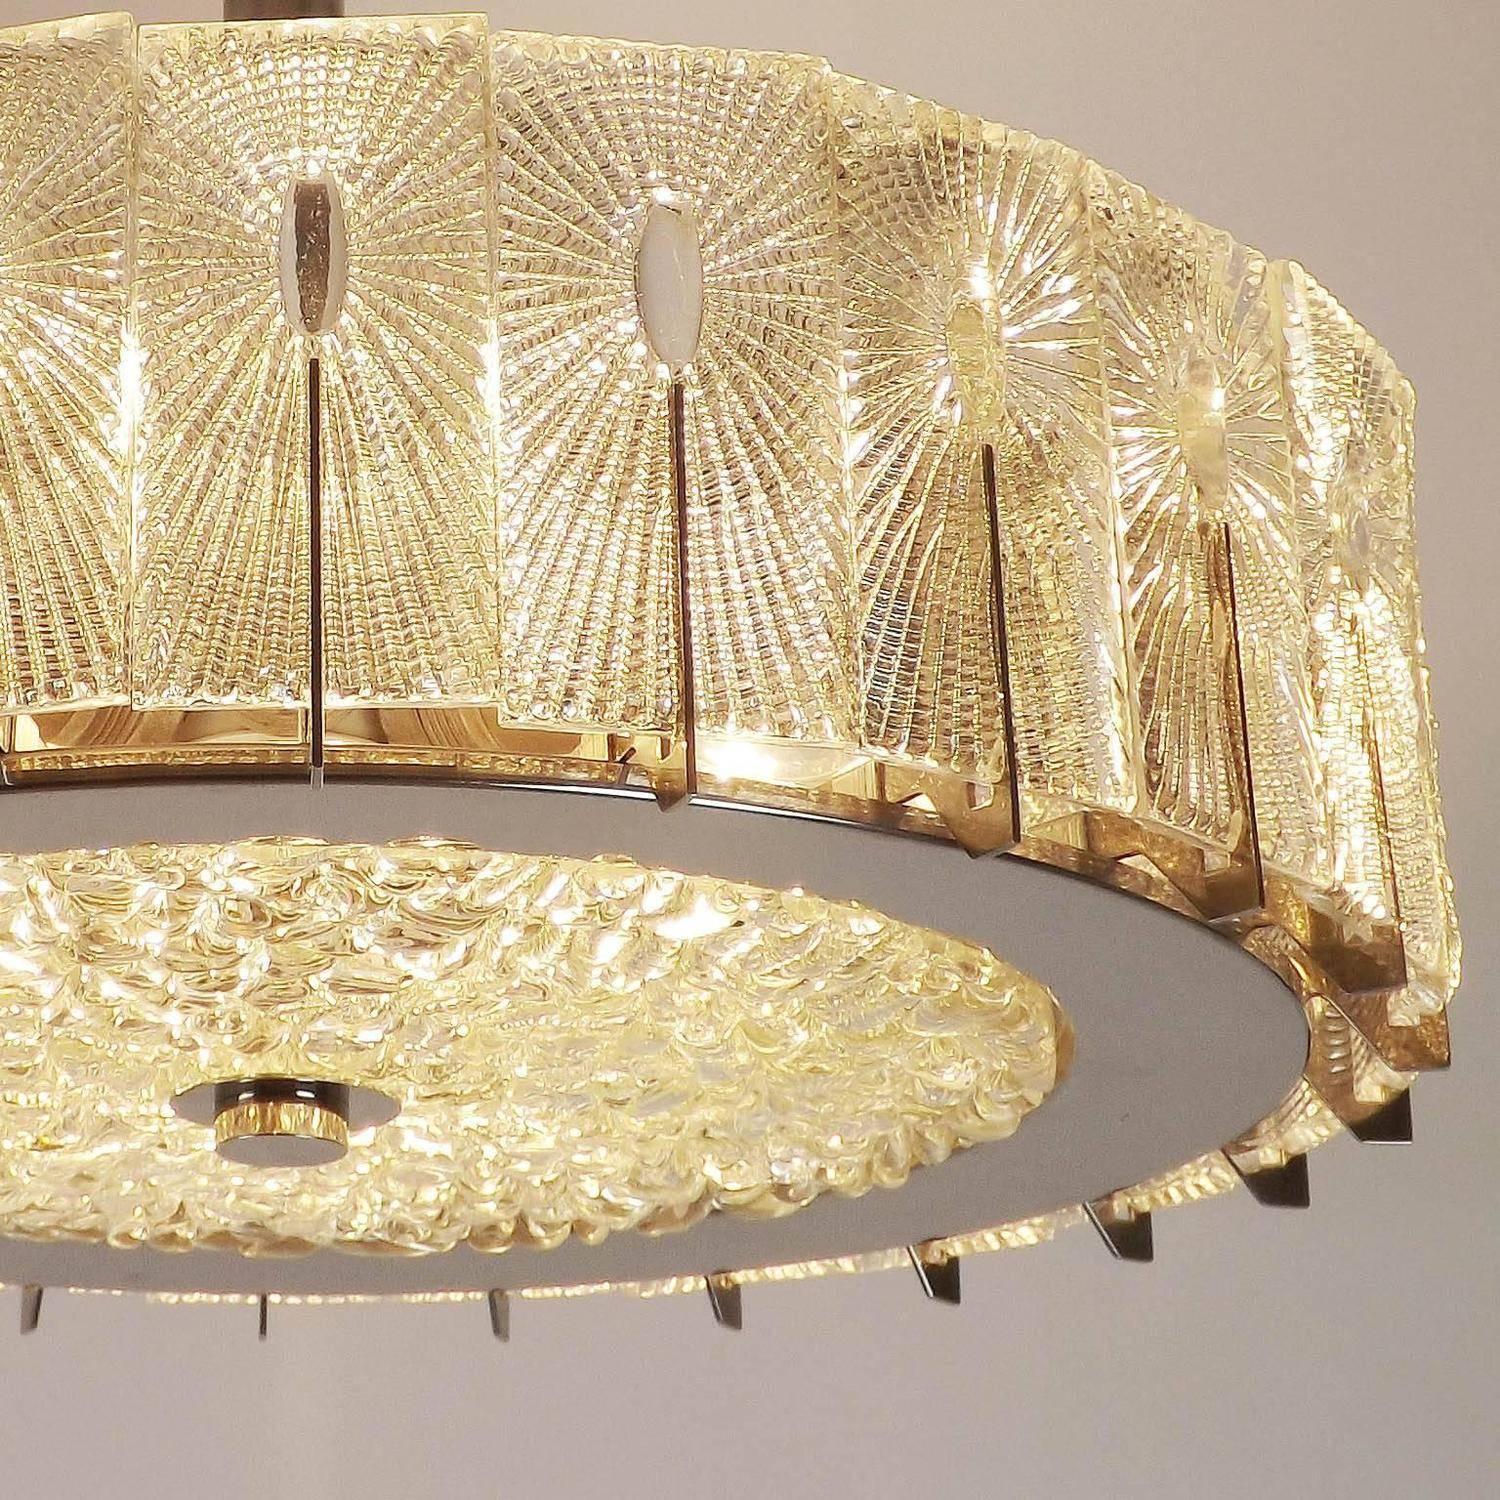 Chandelier by Rupert Nikoll, Textured Glass and Nickel, 1960 For Sale 2